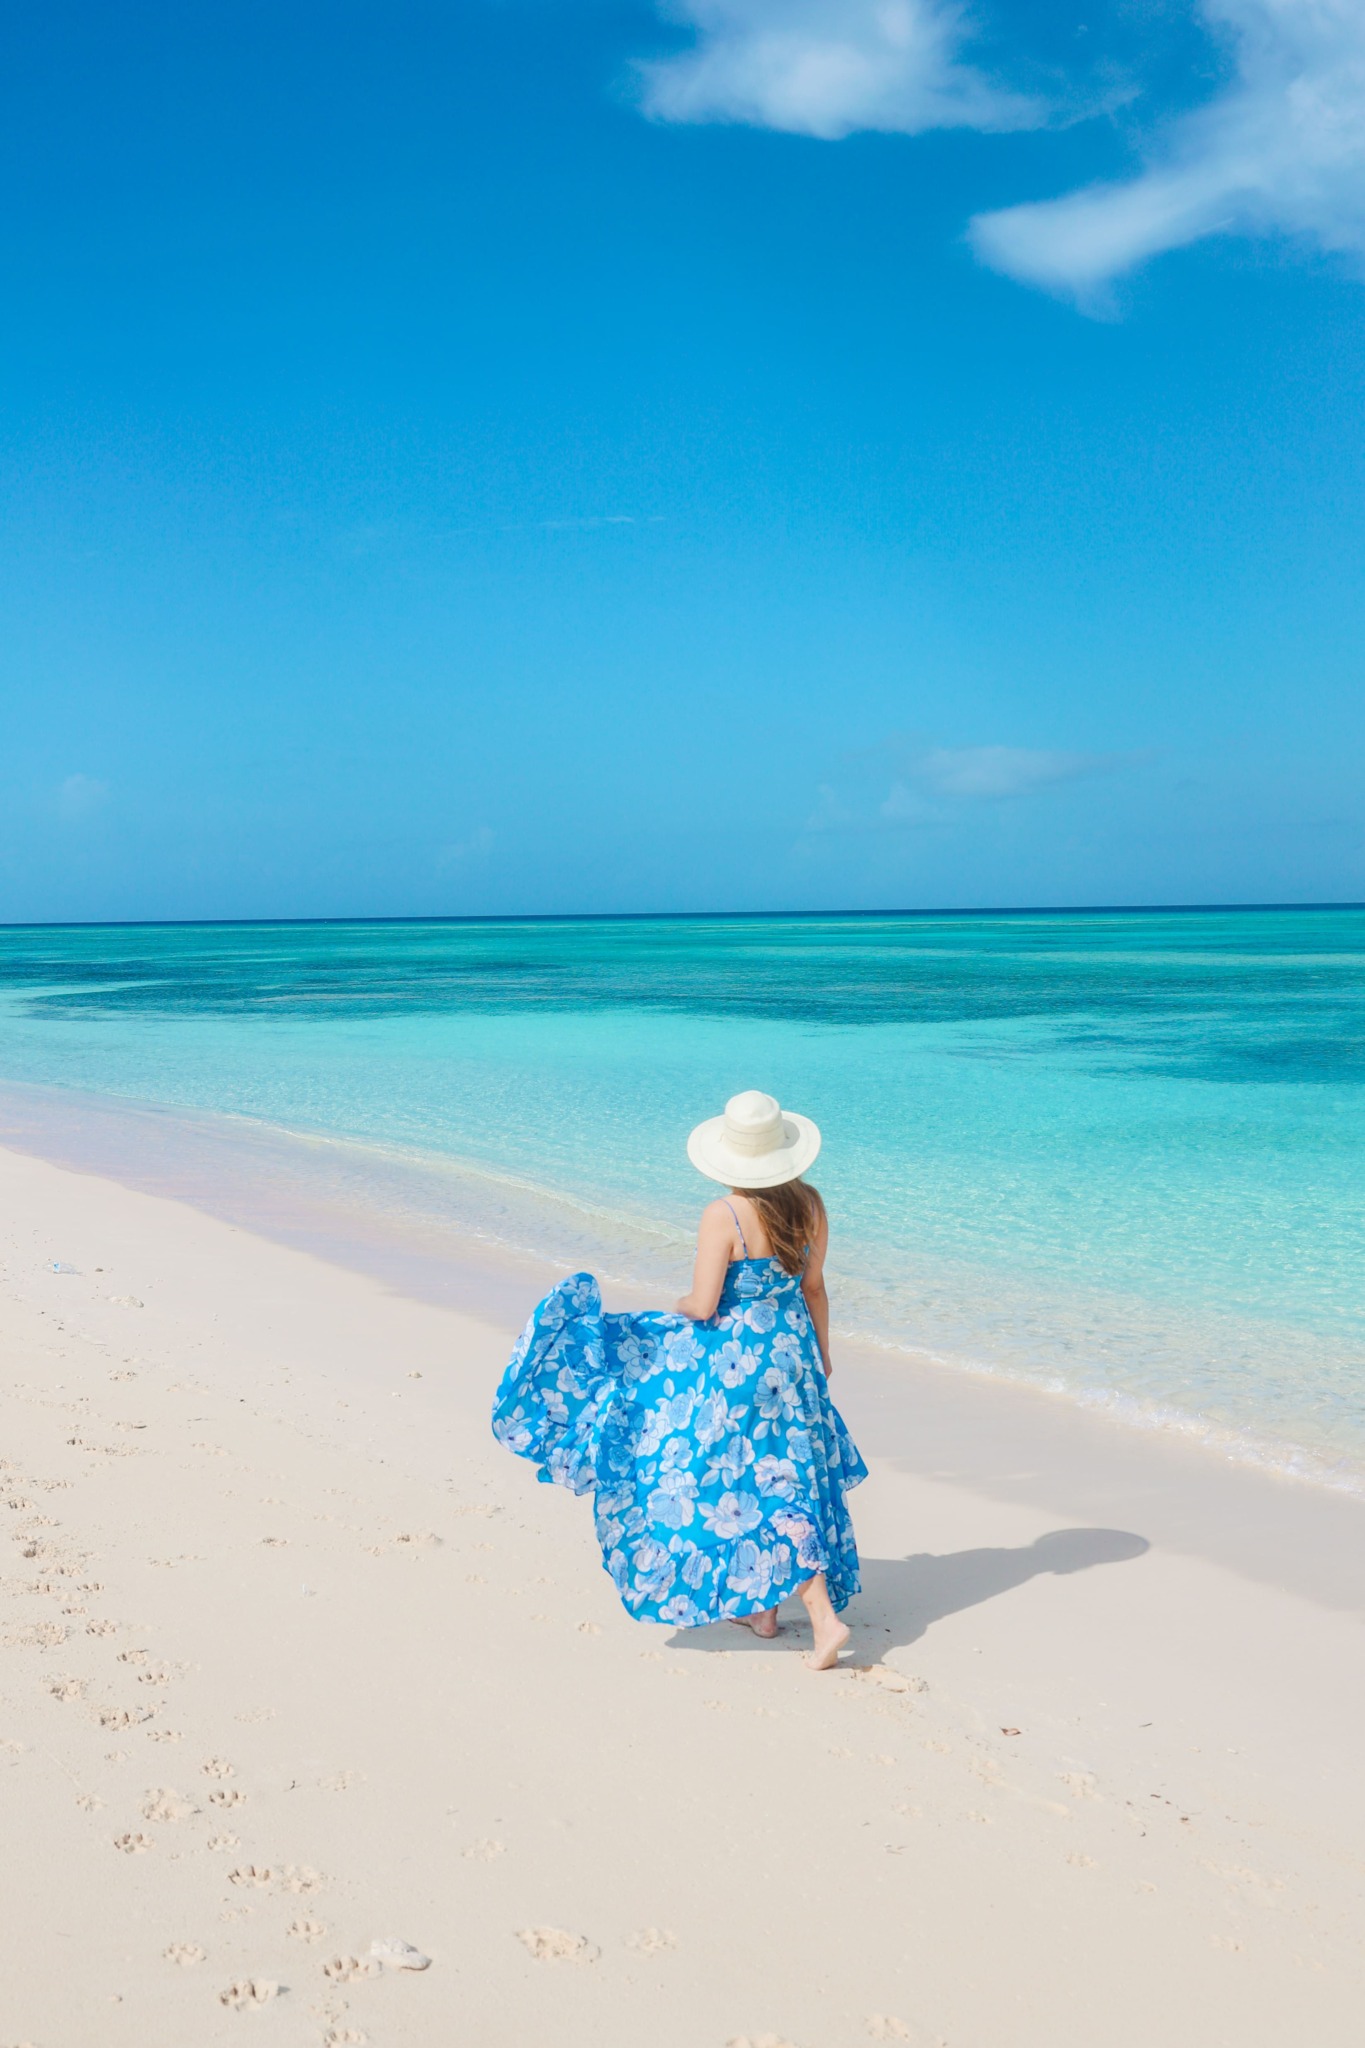 White sand and blue water beaches on islands of Turks and Caicos.Photography by Jaz Wanderlust.